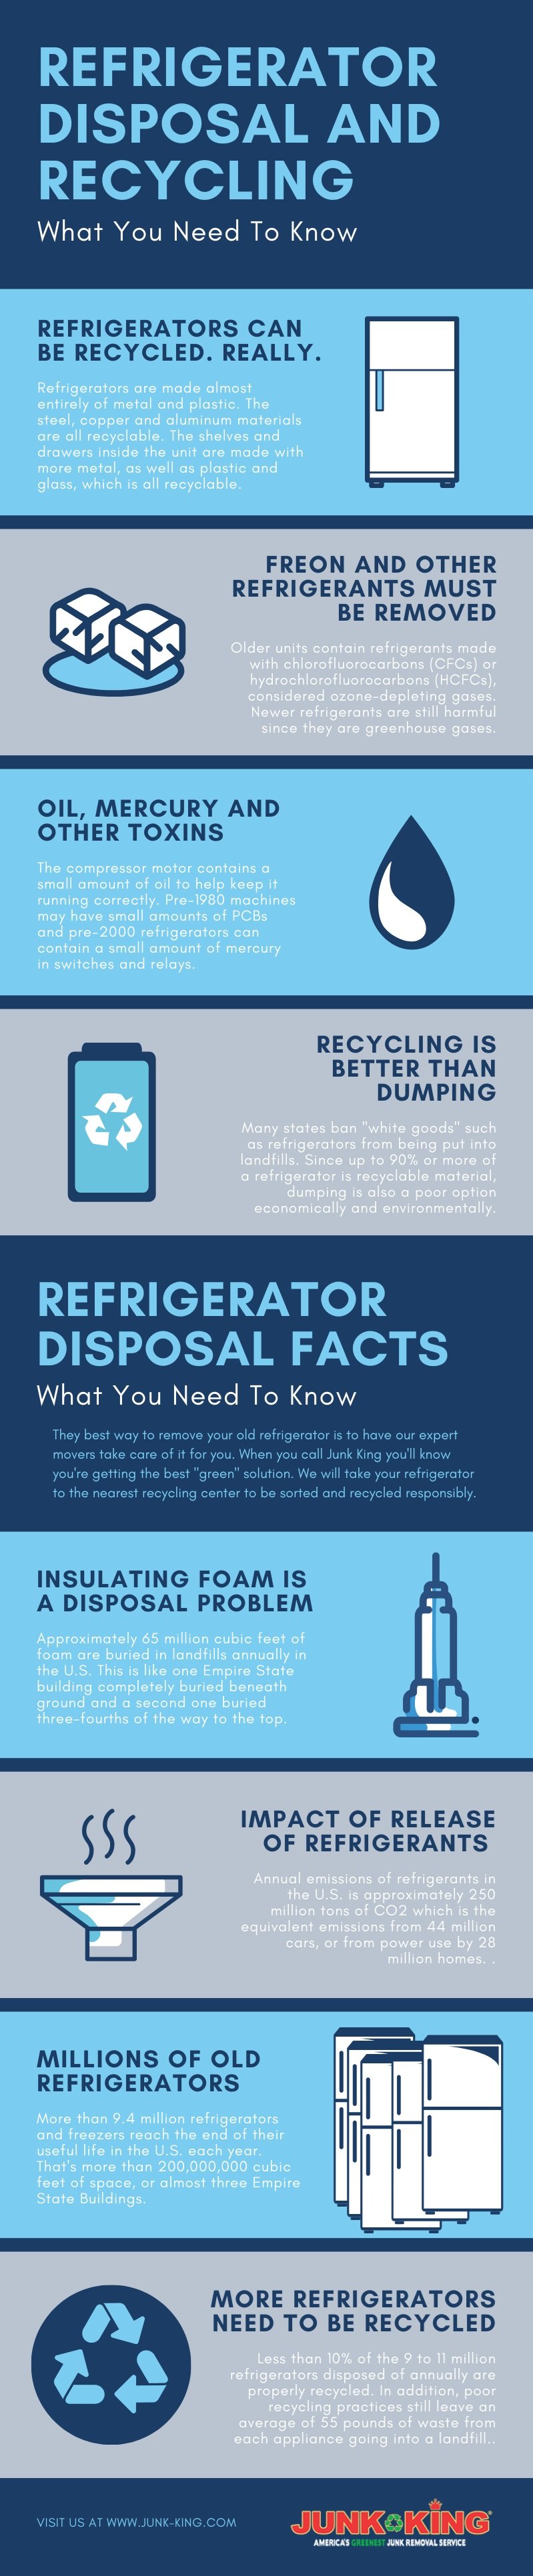 refrigerator-disposal-and-recycling-infographic-jpg